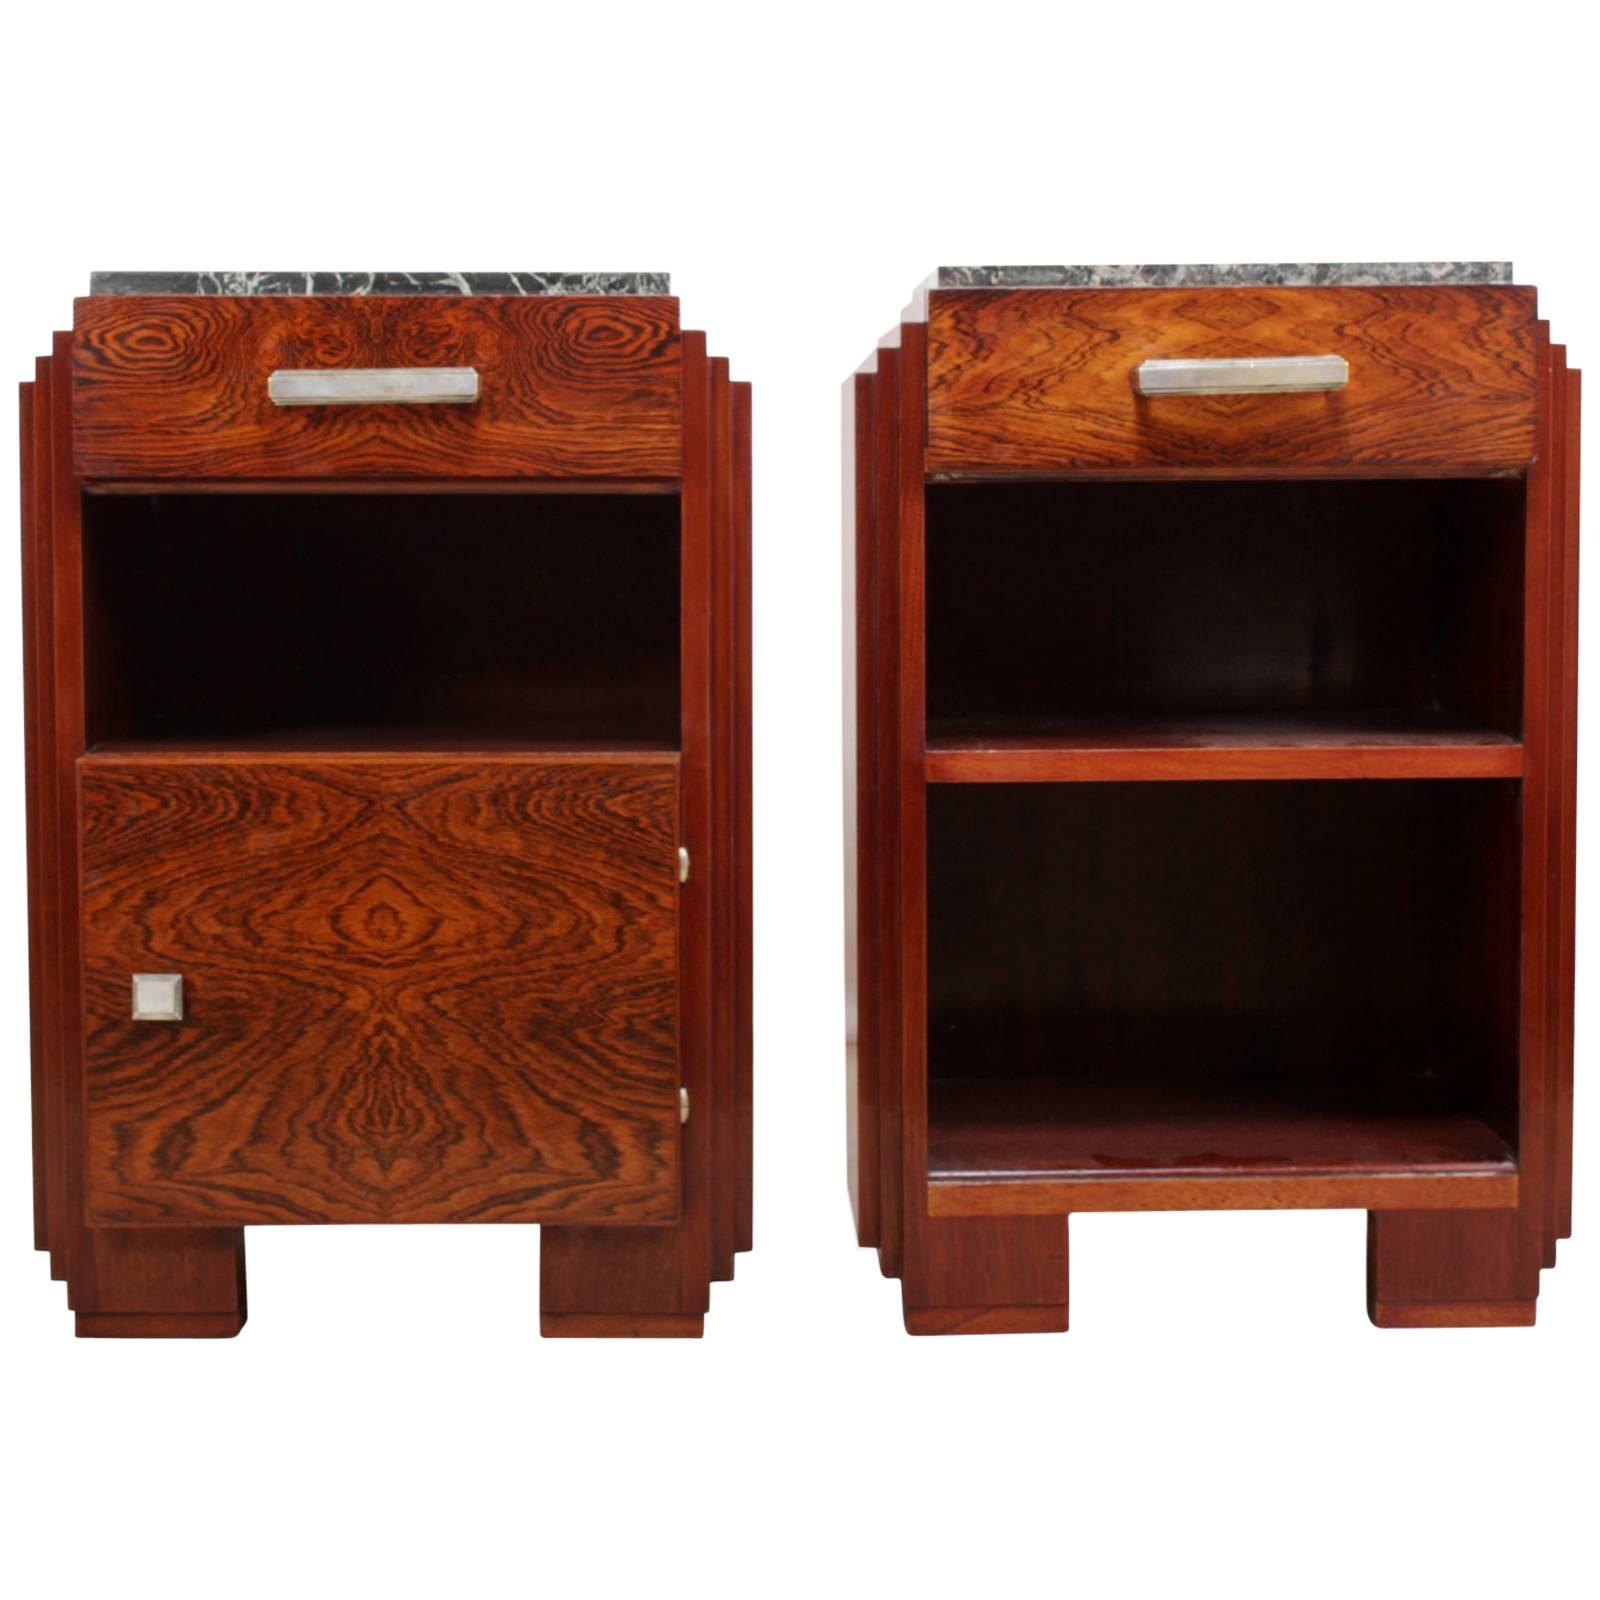 Art Deco Bedside Cabinets with Marble Tops, circa 1920